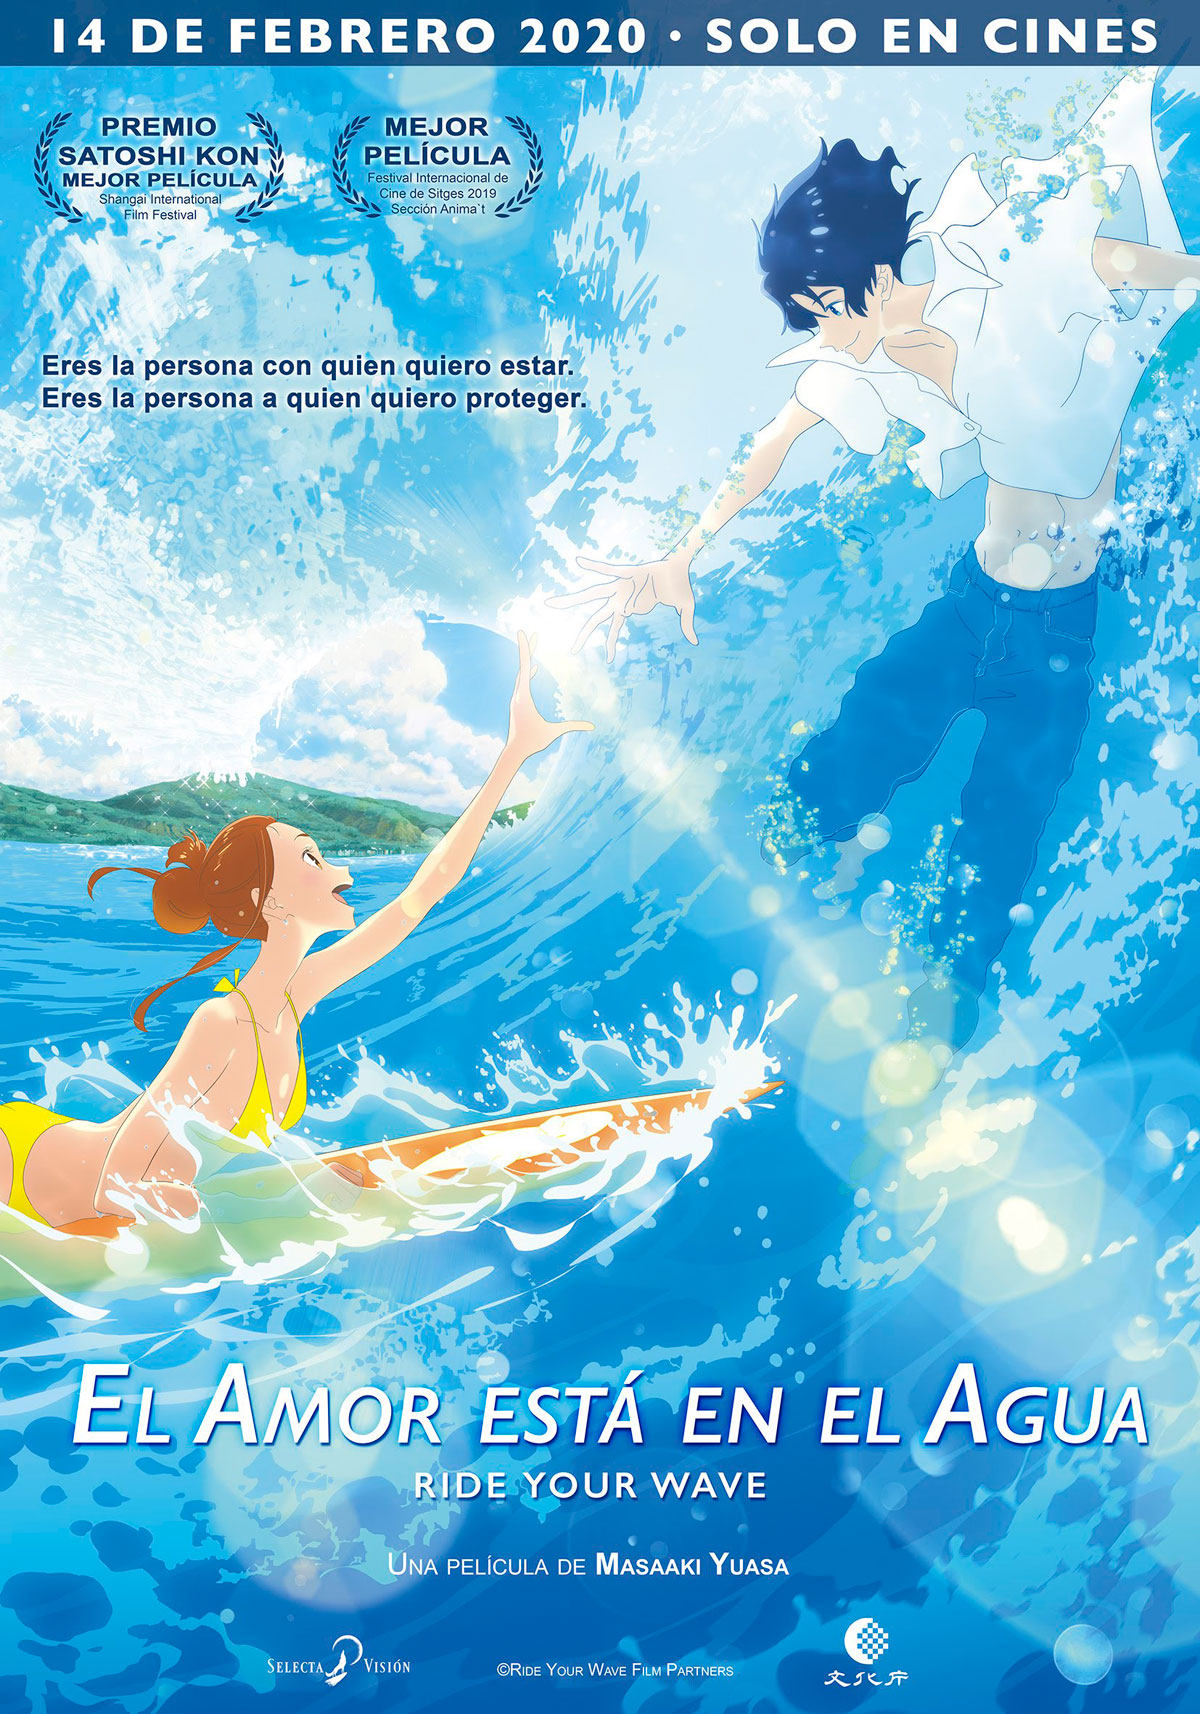 Ride Your Wave (2019) is a romantic anime